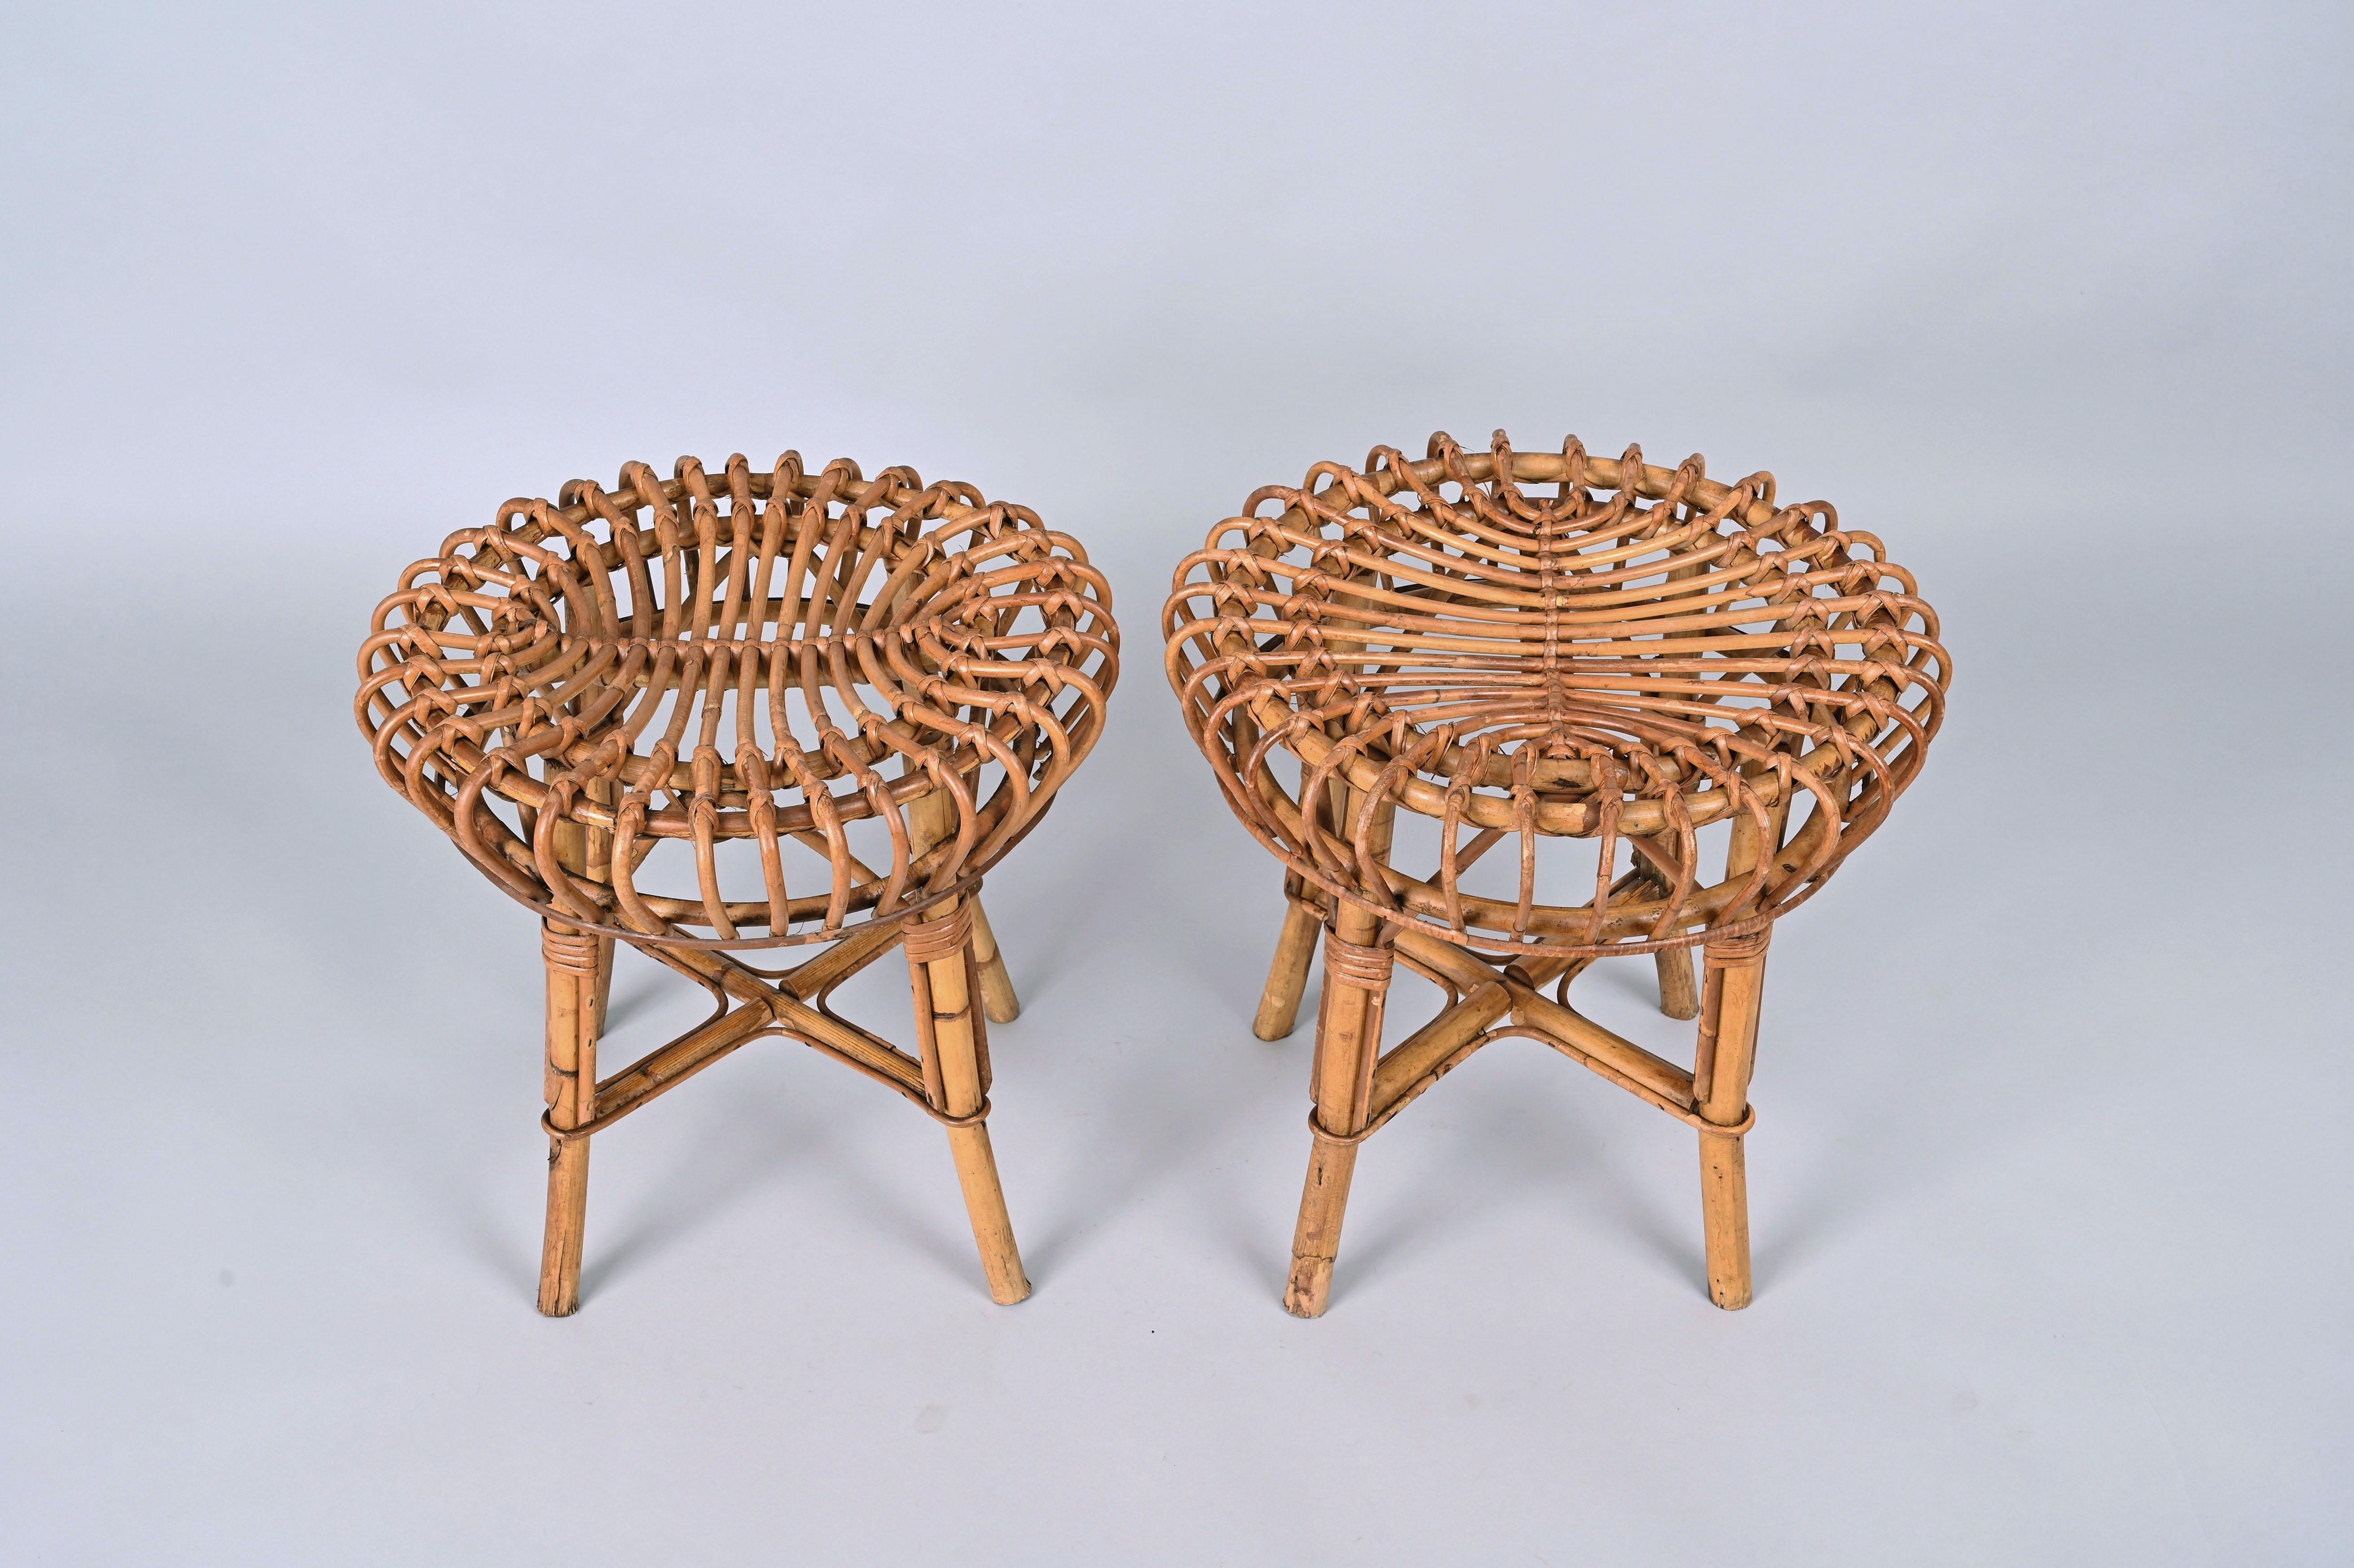 Pair of midcentury round rattan and bamboo ottoman stools. This set was designed by Franco Albini in Italy during the 1960s.

Franco Albini's extraordinary architectural ideas emerge through purity and poetry forms, mixing soft shapes with